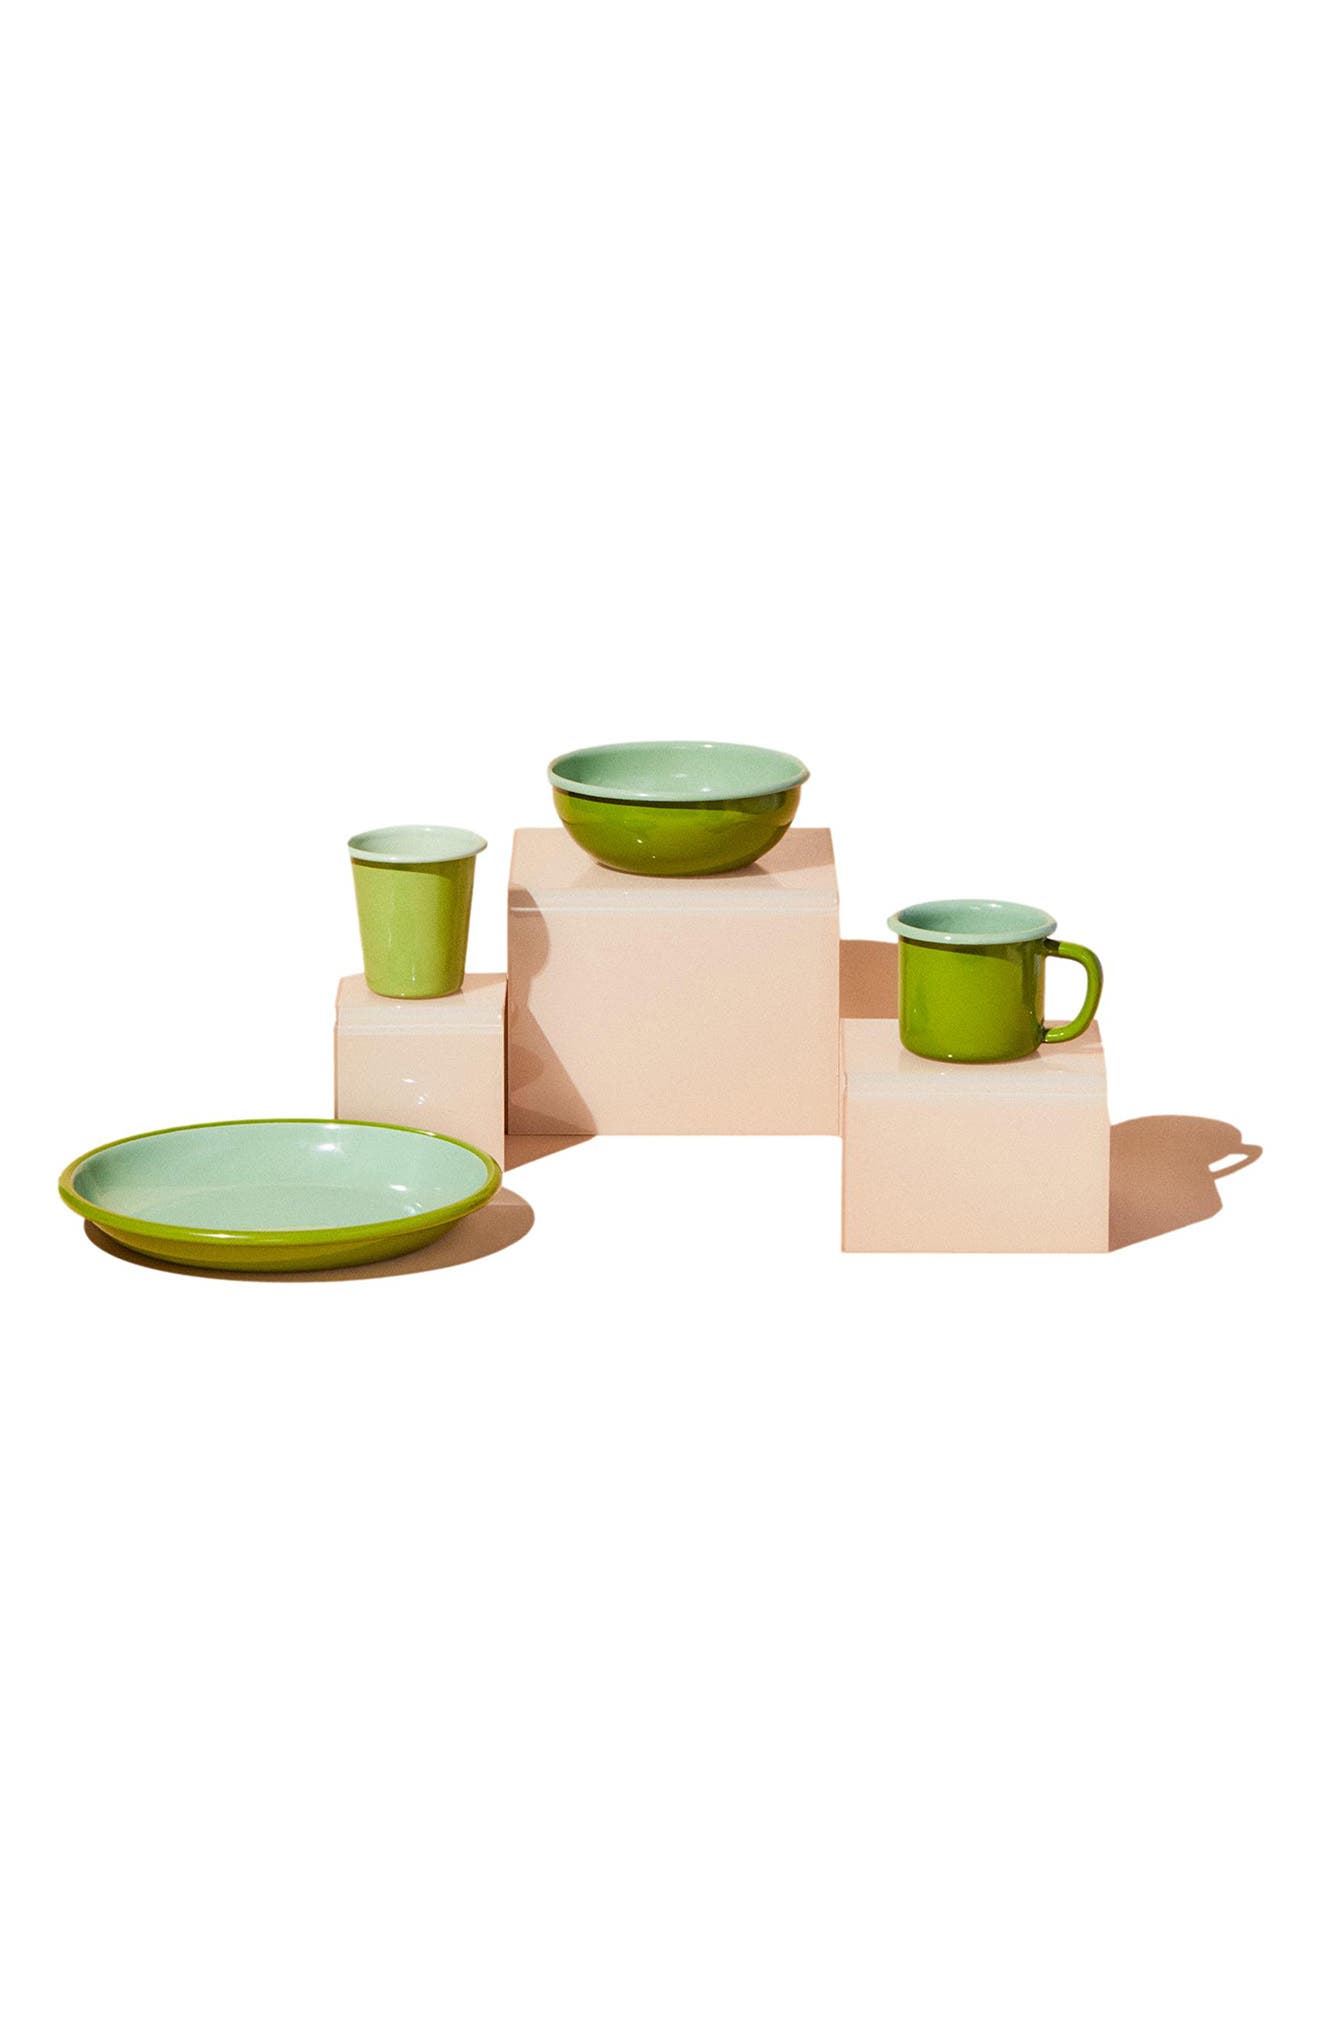 THE GET OUT x Crow Canyon Home 4-Piece Enamelware Set in Lime